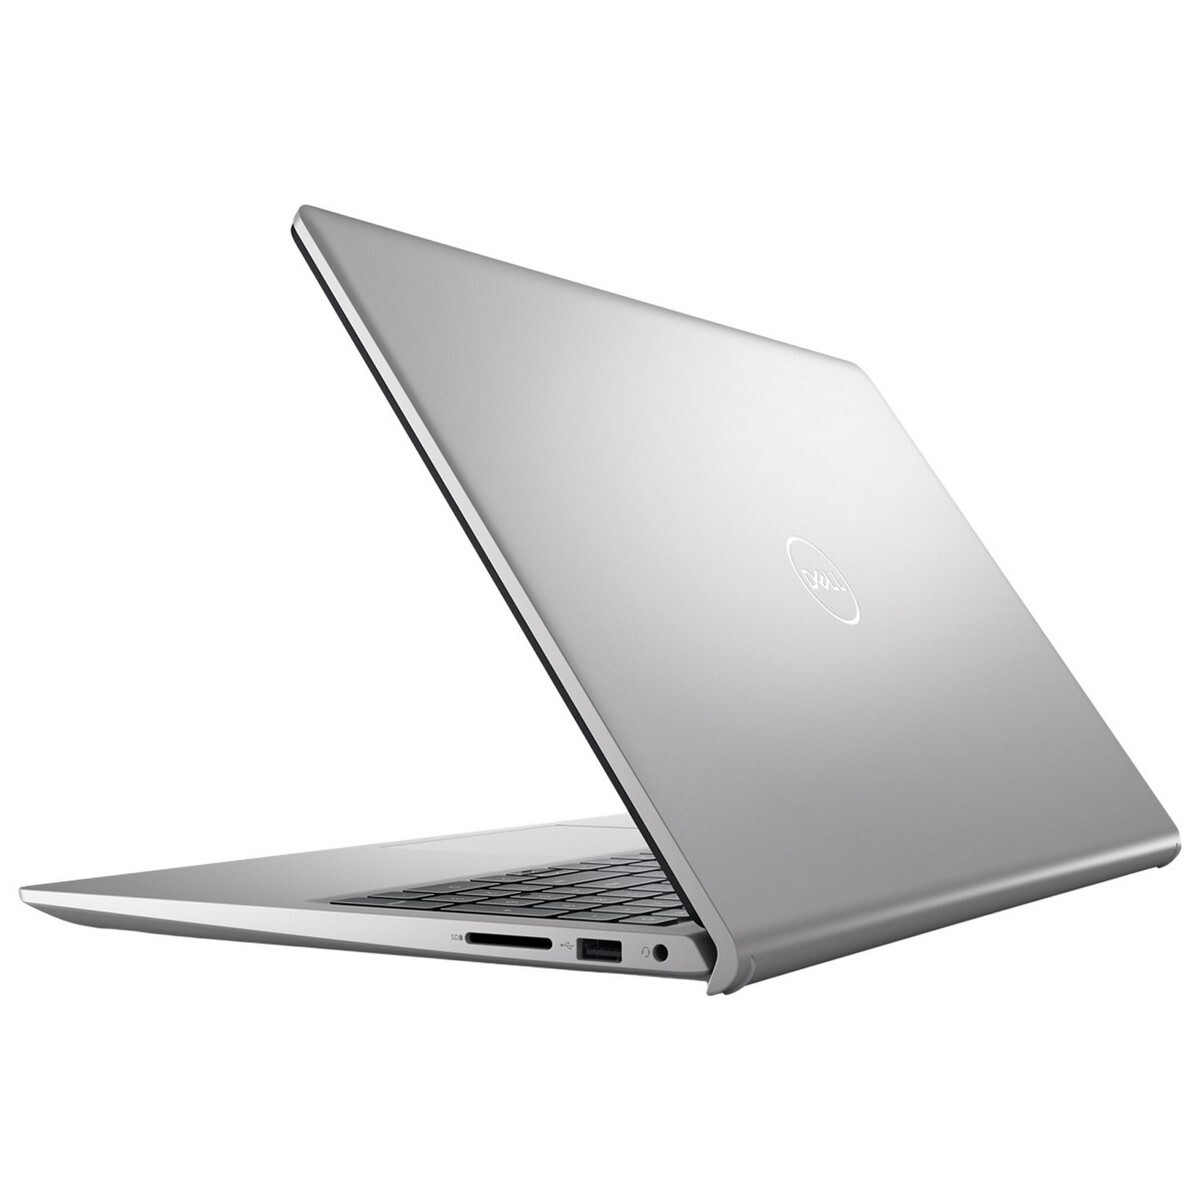 DELL Inspiron 15 3530 Core i5 13th Gen - (8 GB/1 TB SSD/Windows 11 Home) IN3530RW8JY001ORS1 Laptop , Platinum Silver